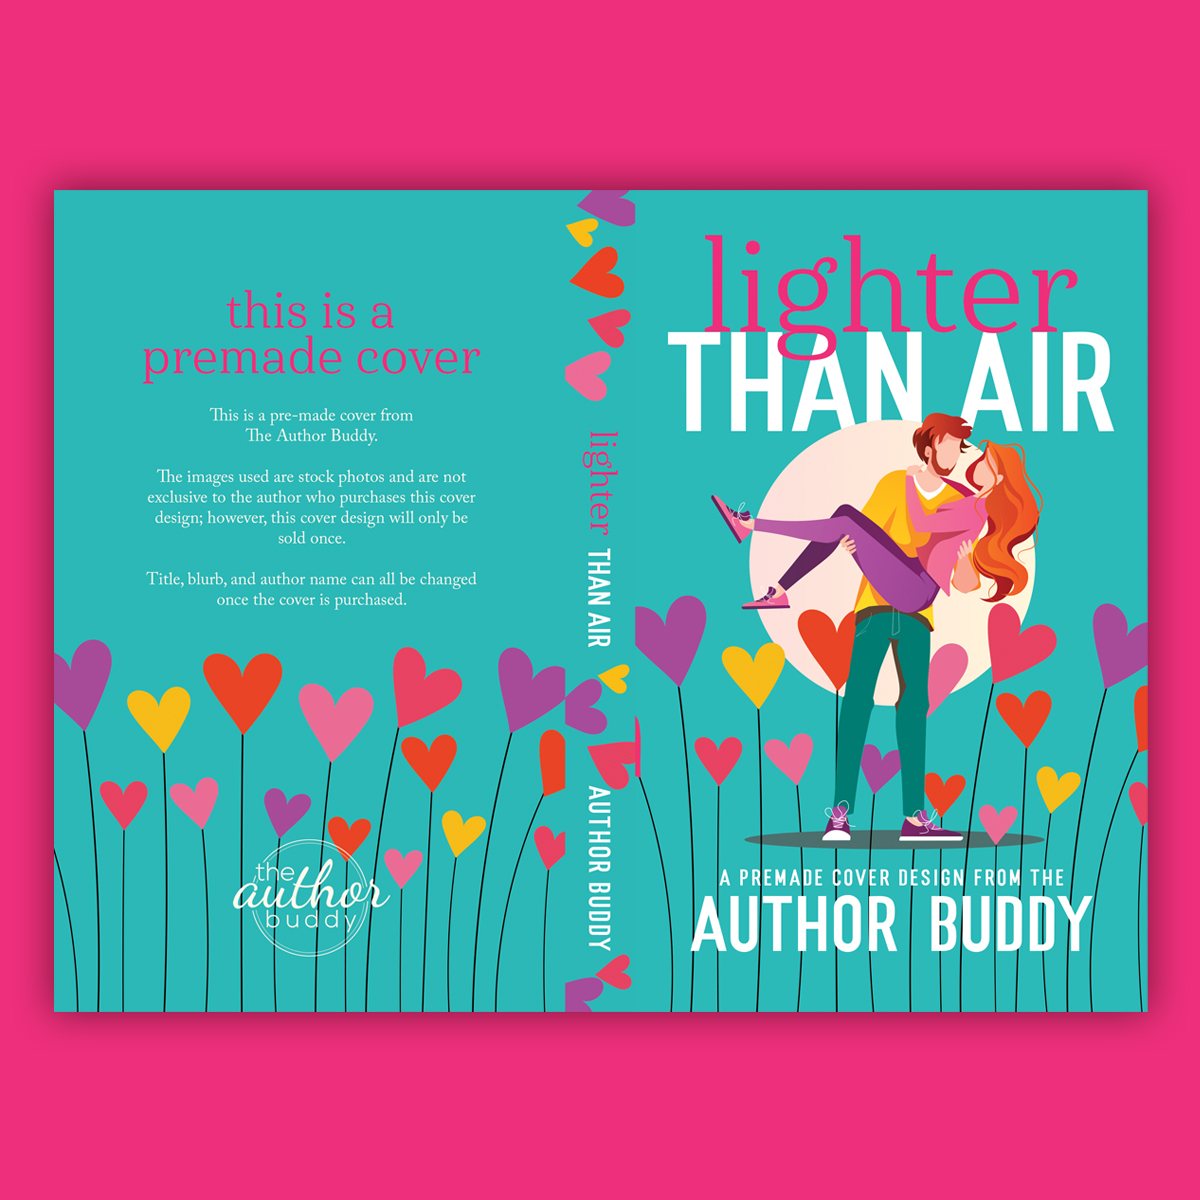 Lighter Than Air - Premade Contemporary Romance Book Cover from The Author Buddy